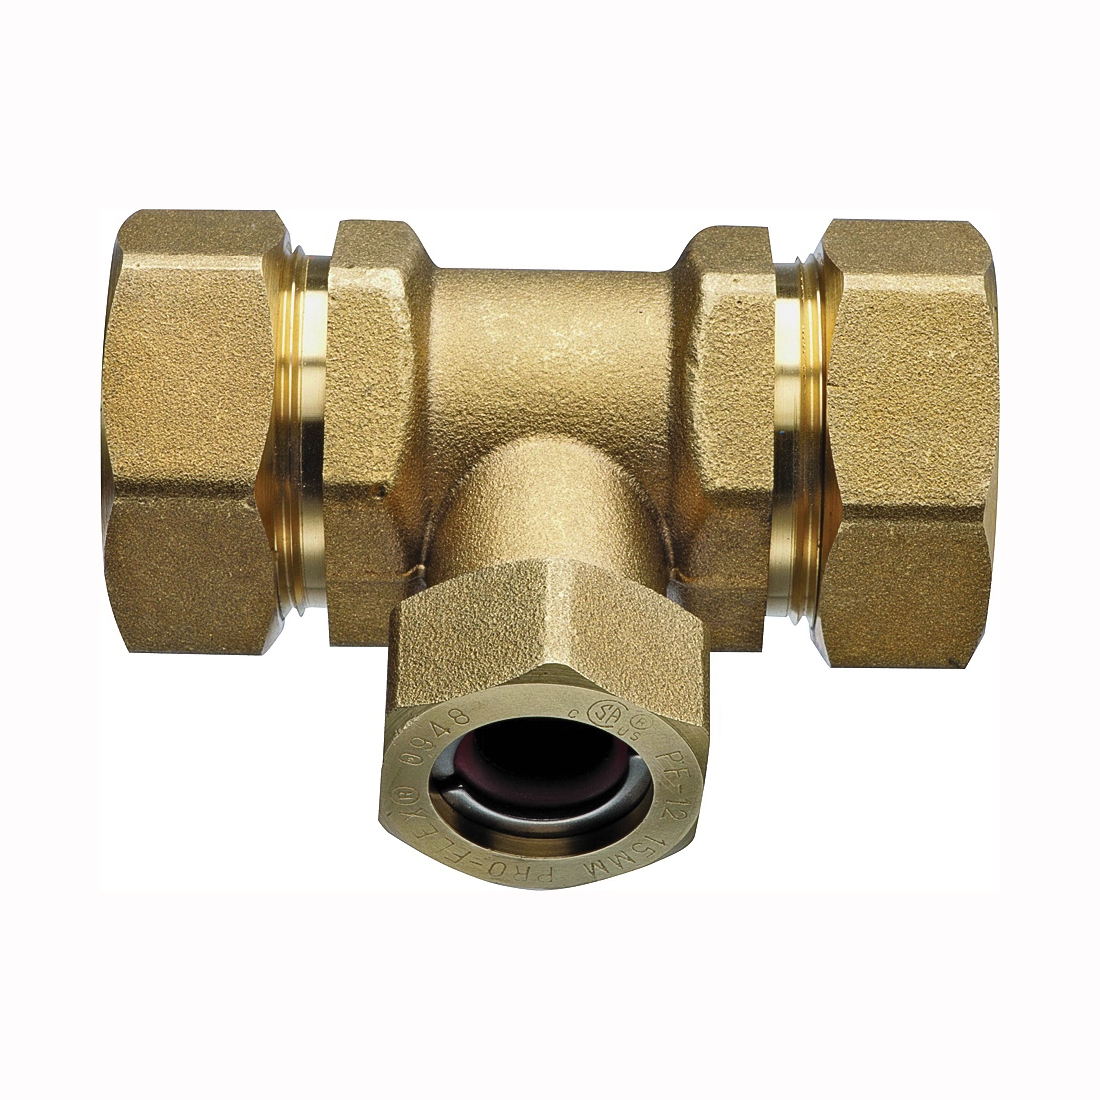 PFTE-CCB6 Tube Tee, 3/4 x 1/2 in, Brass